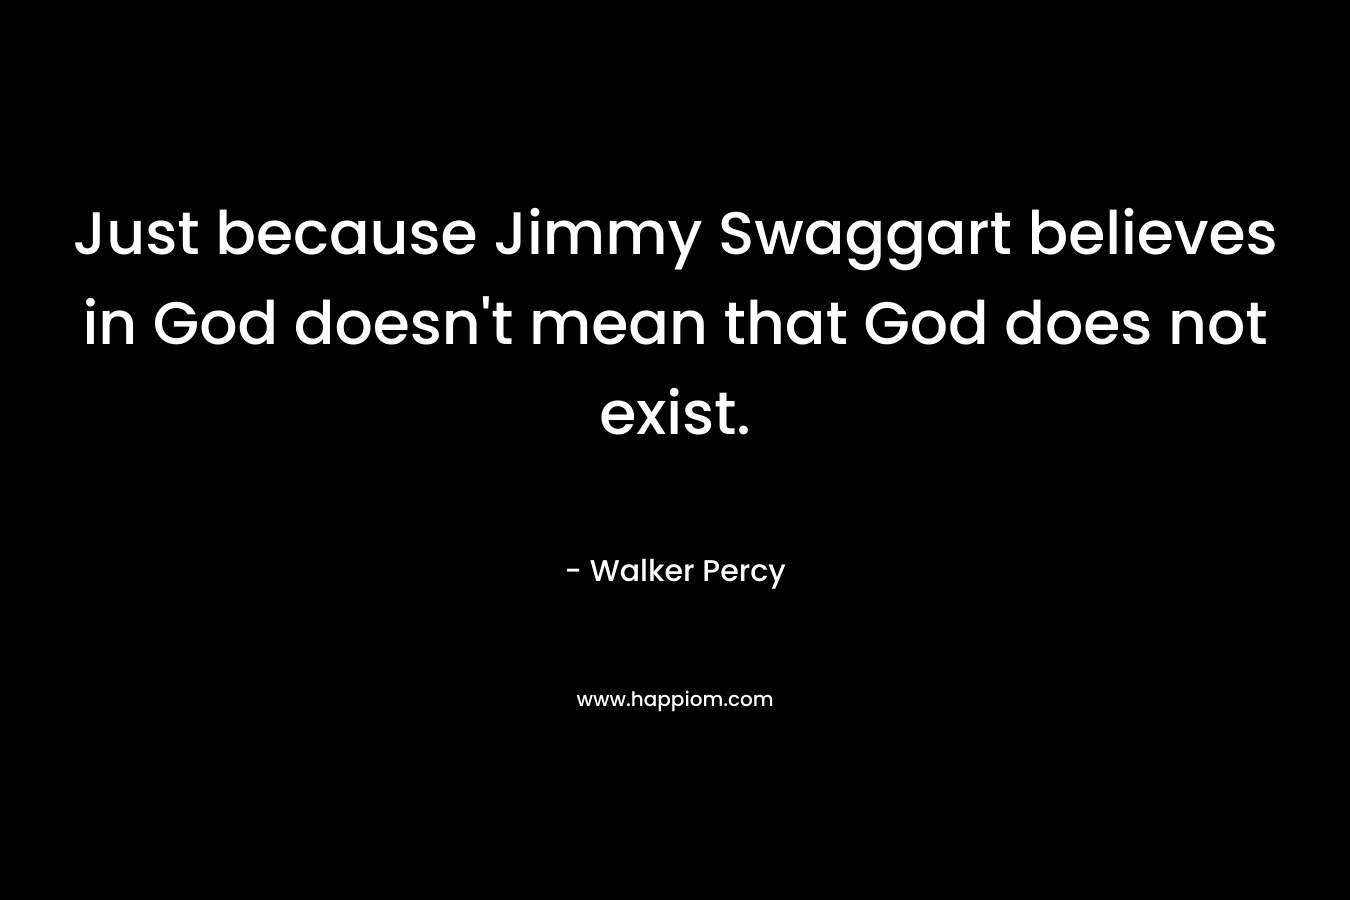 Just because Jimmy Swaggart believes in God doesn’t mean that God does not exist. – Walker Percy